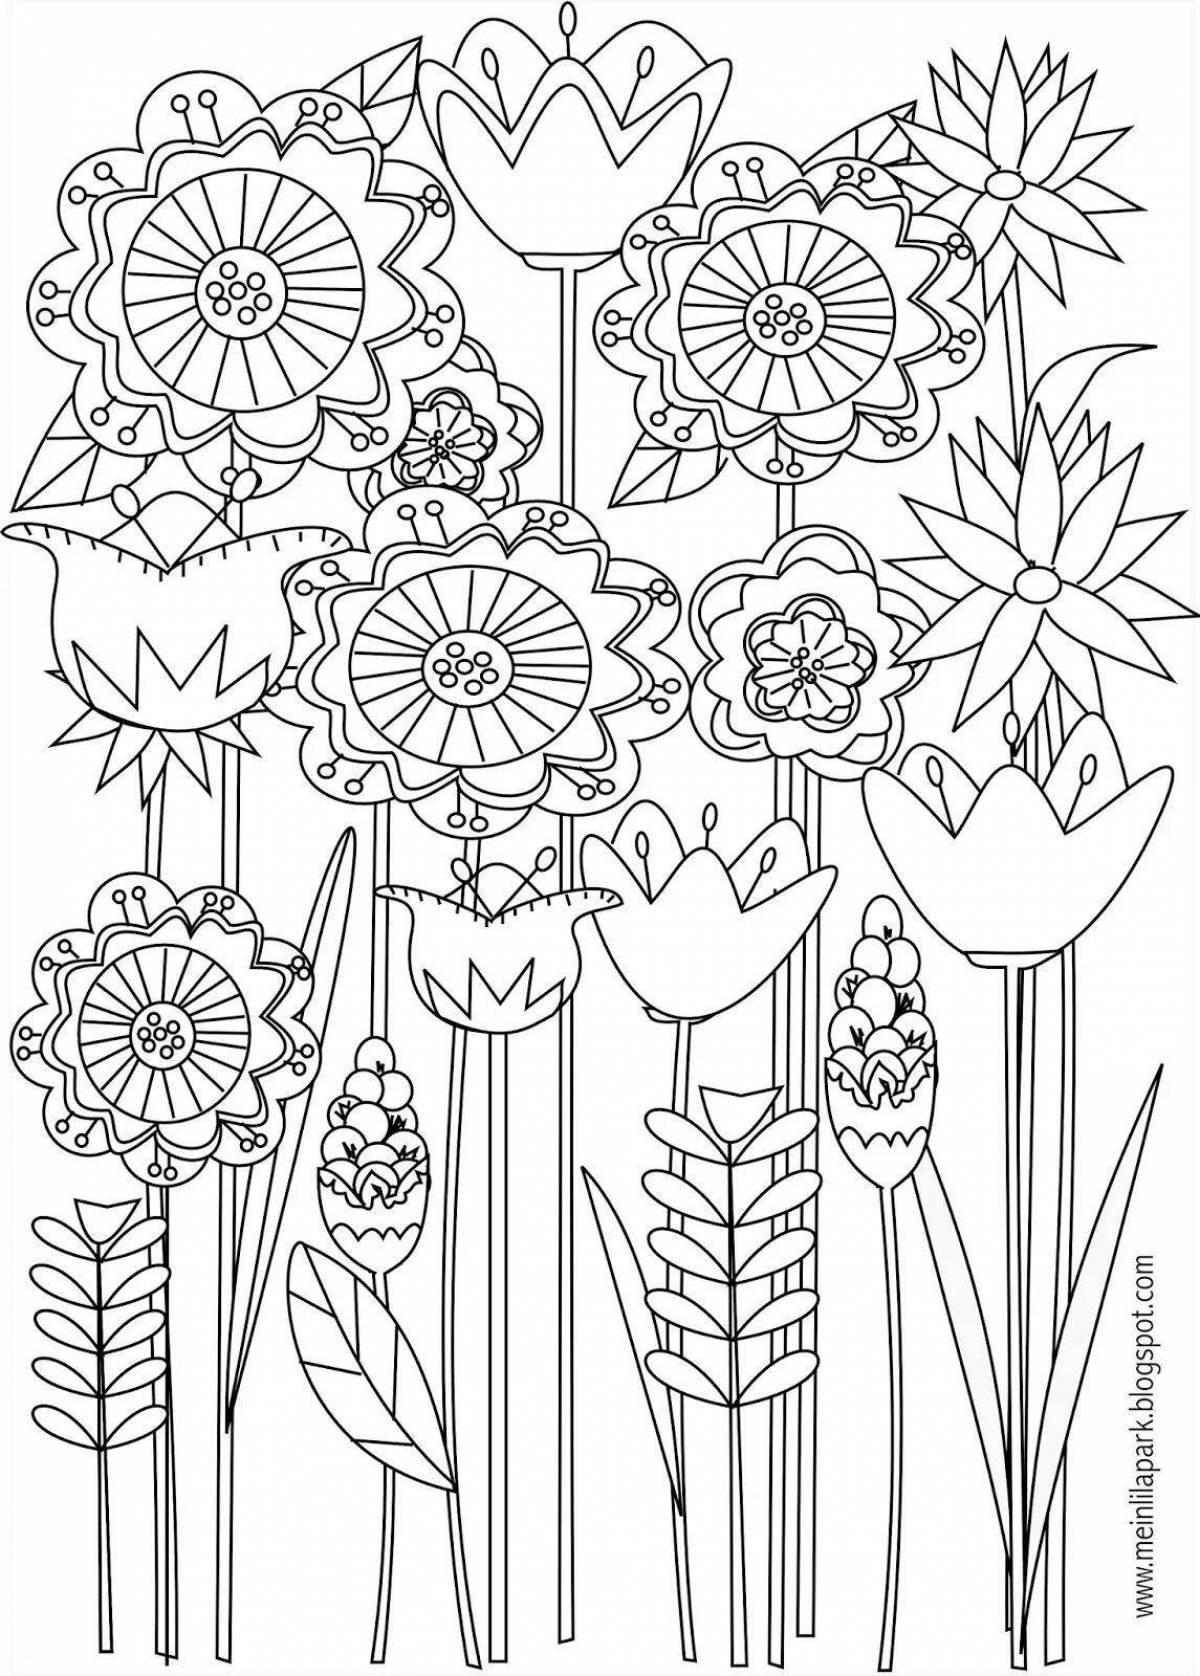 Great spring anti-stress coloring book